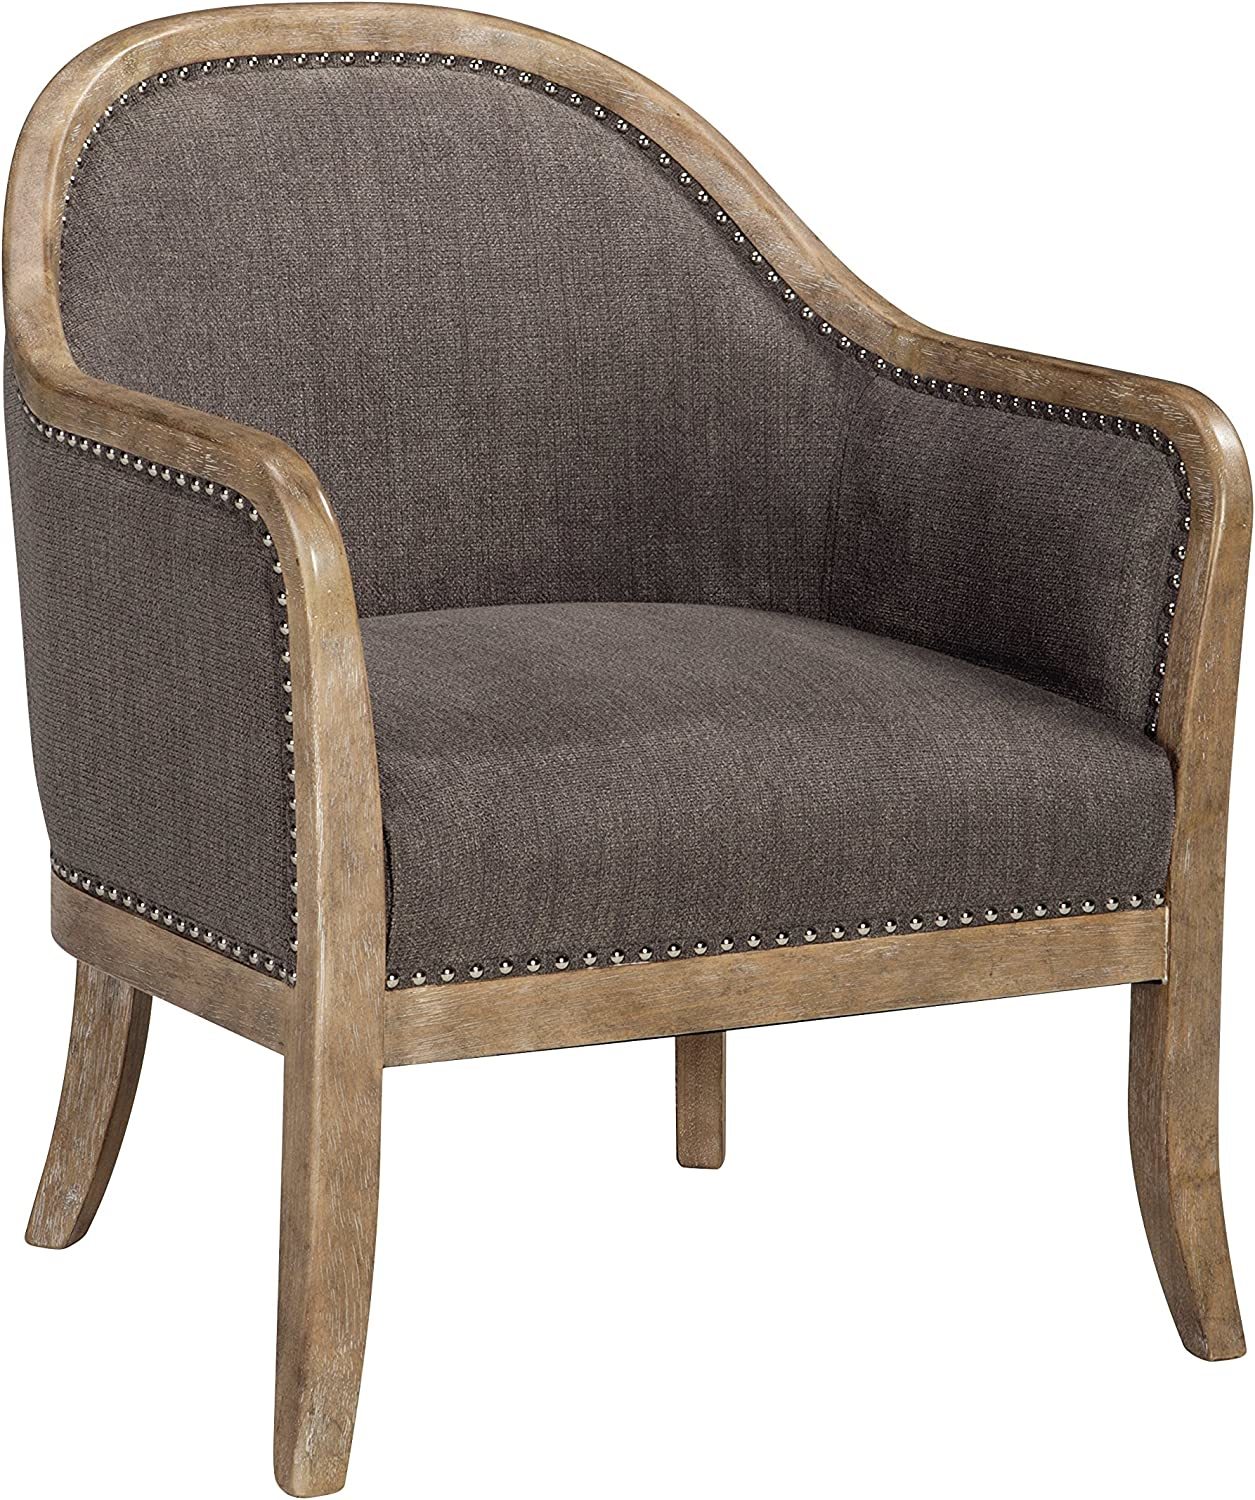 Signature Design by Ashley Engineer Vintage Casual Accent Chair with, Brown - $441.99